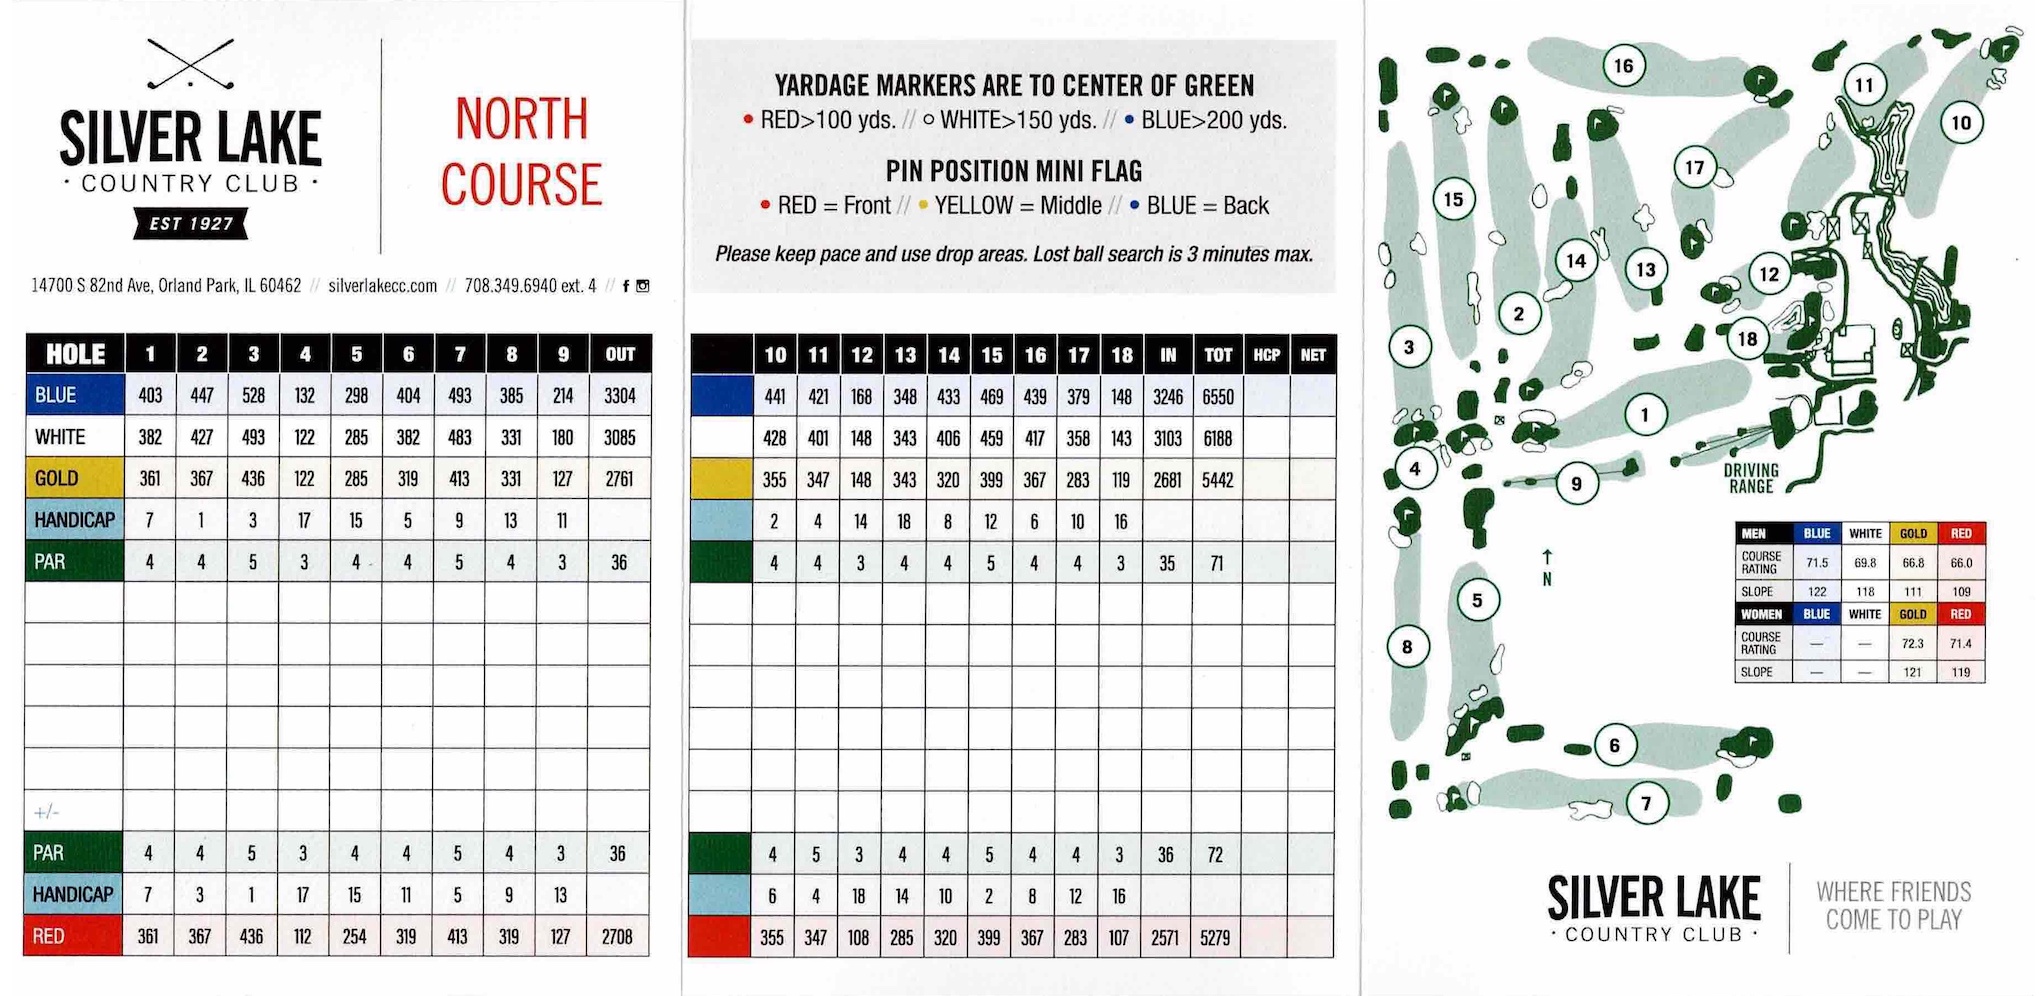 Scan of the scorecard from Silver Lake North Course in Orland Park, Illinois. 